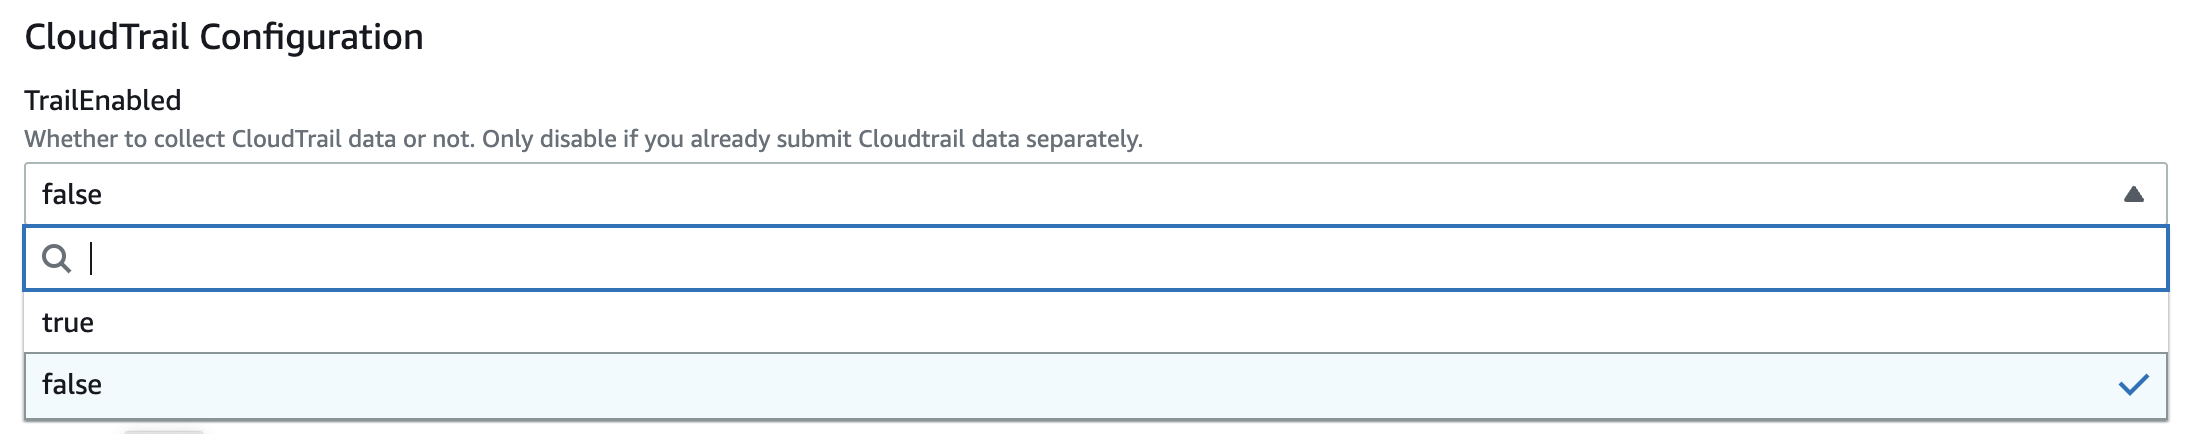 CloudTrail Configuration in the AWS Console. In the TrailEnabled dropdown, select "false".